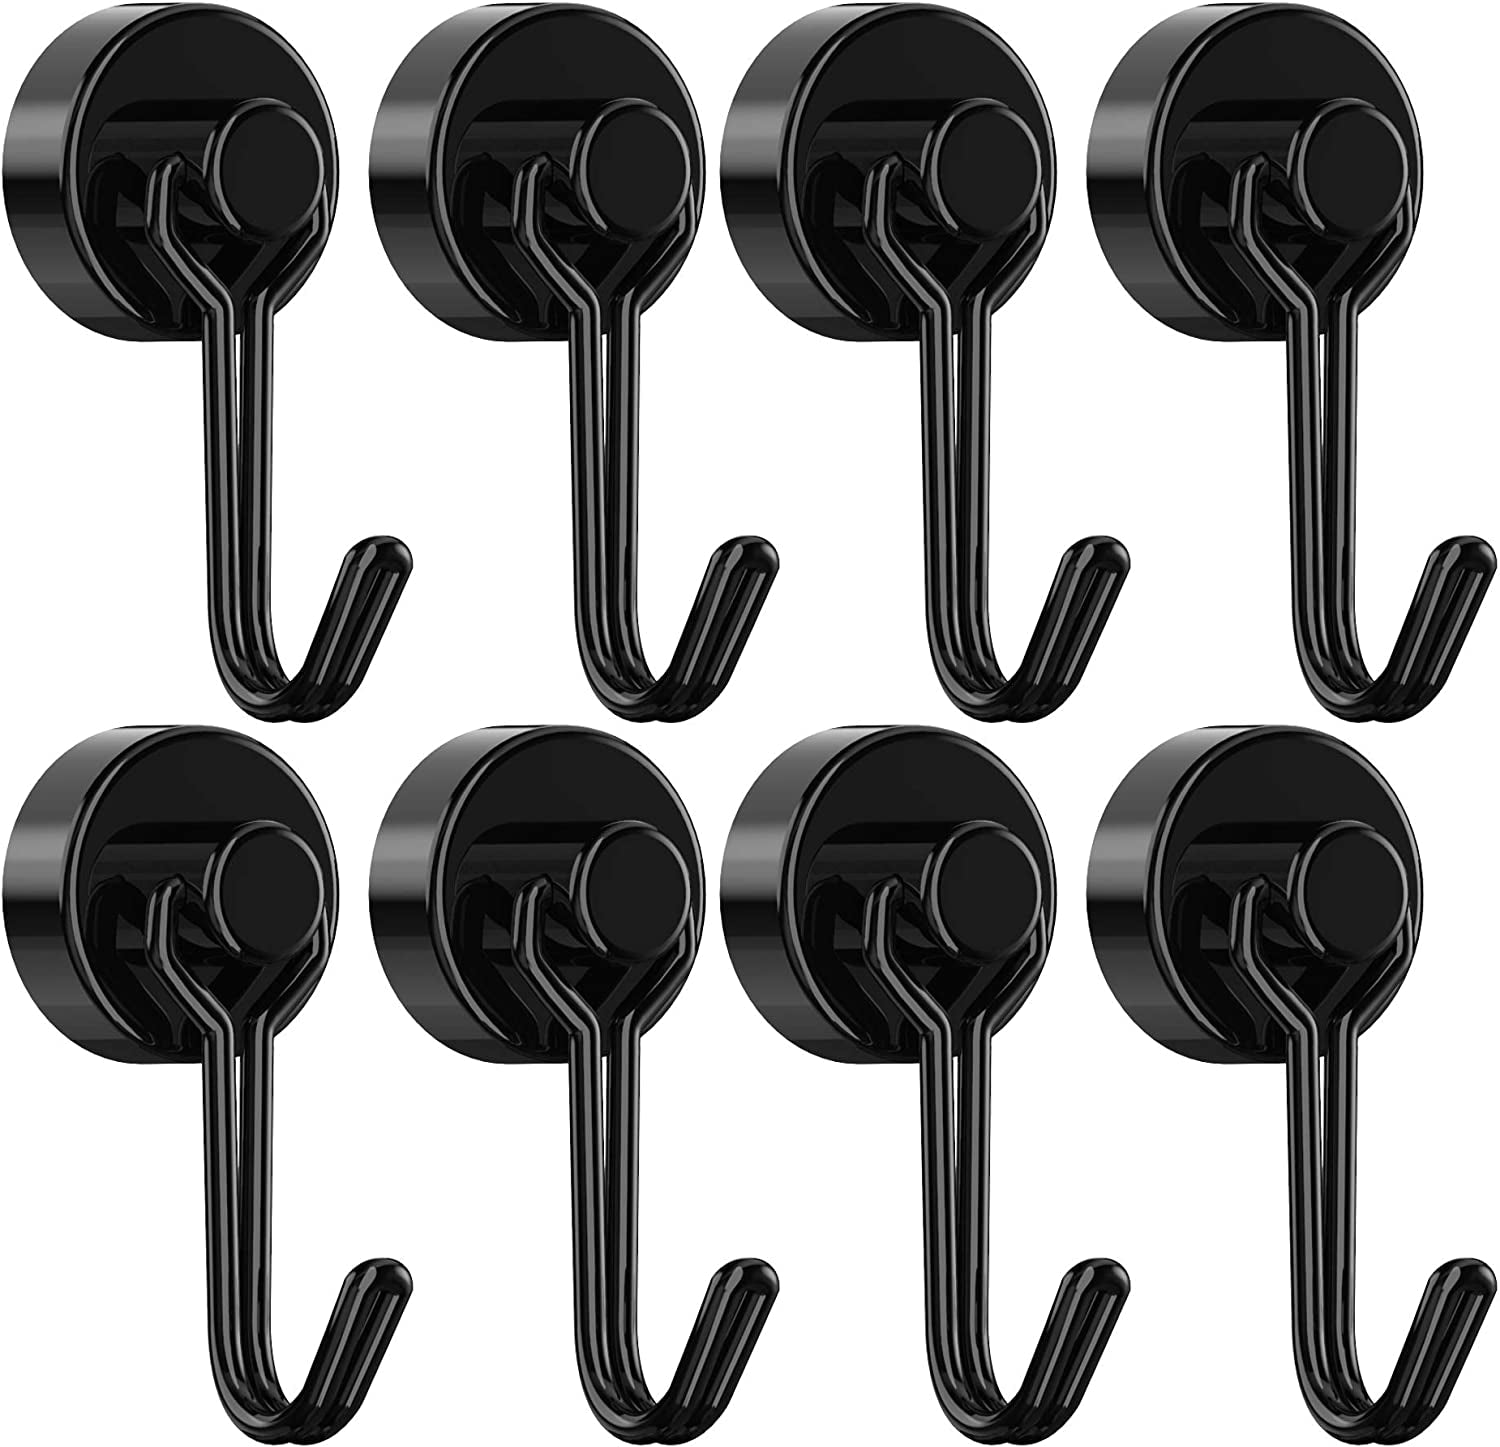 Tohoer, Magnetic Hooks,Tohoer Heavy Duty Neodymium Magnet Hook 30LBS with Rust Proof for Indoor Outdoor Hanging,Refrigerator,Grill,Kitchen,Key Holder,Black,Pack of 8